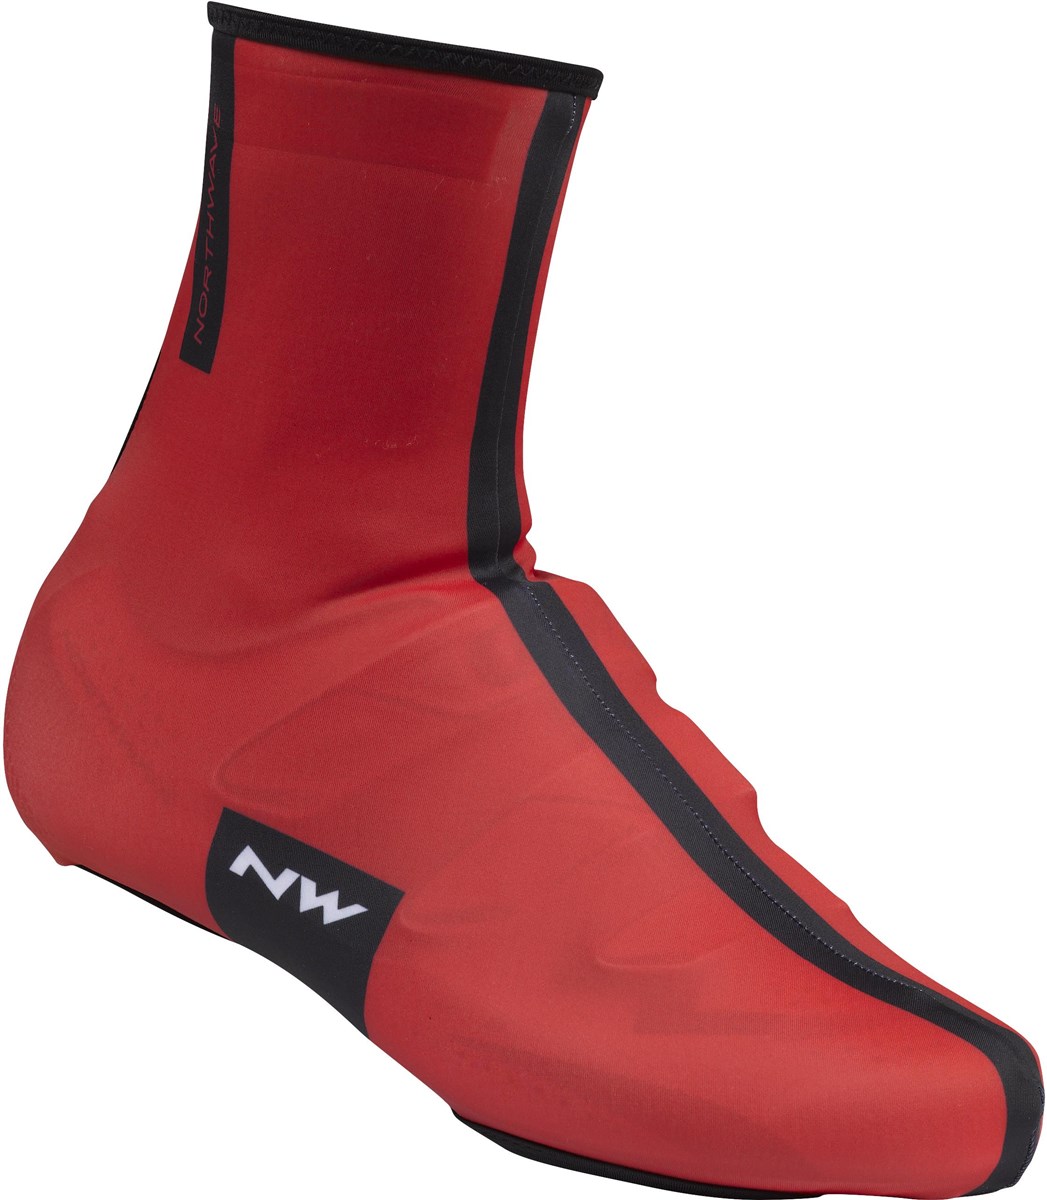 Northwave Extreme Graphic Shoe Covers product image